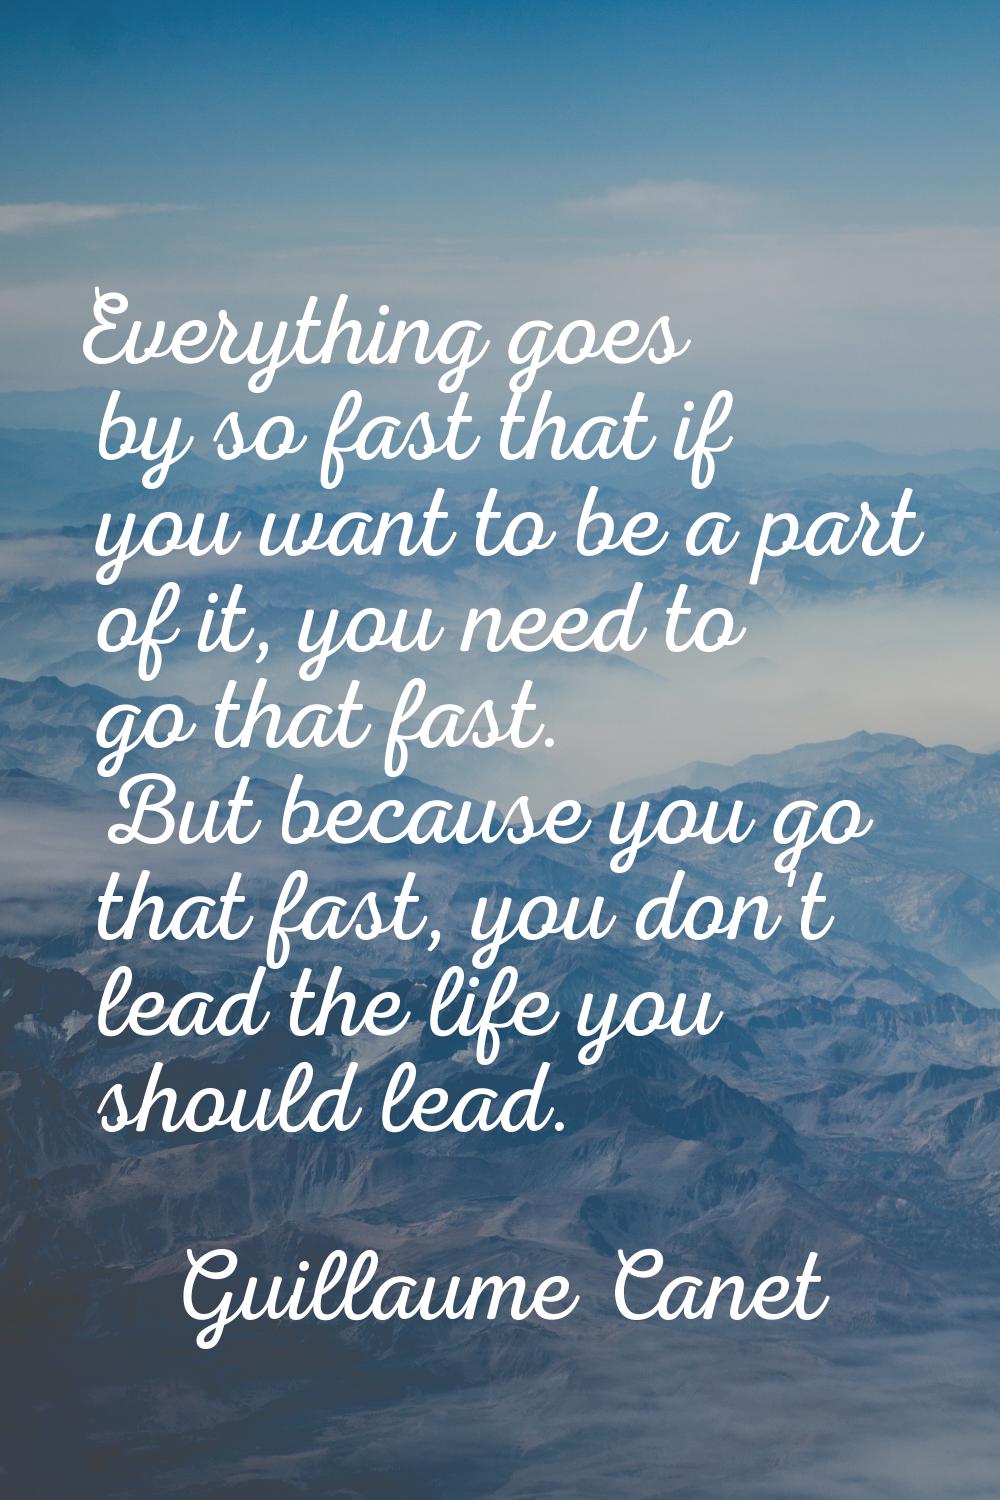 Everything goes by so fast that if you want to be a part of it, you need to go that fast. But becau